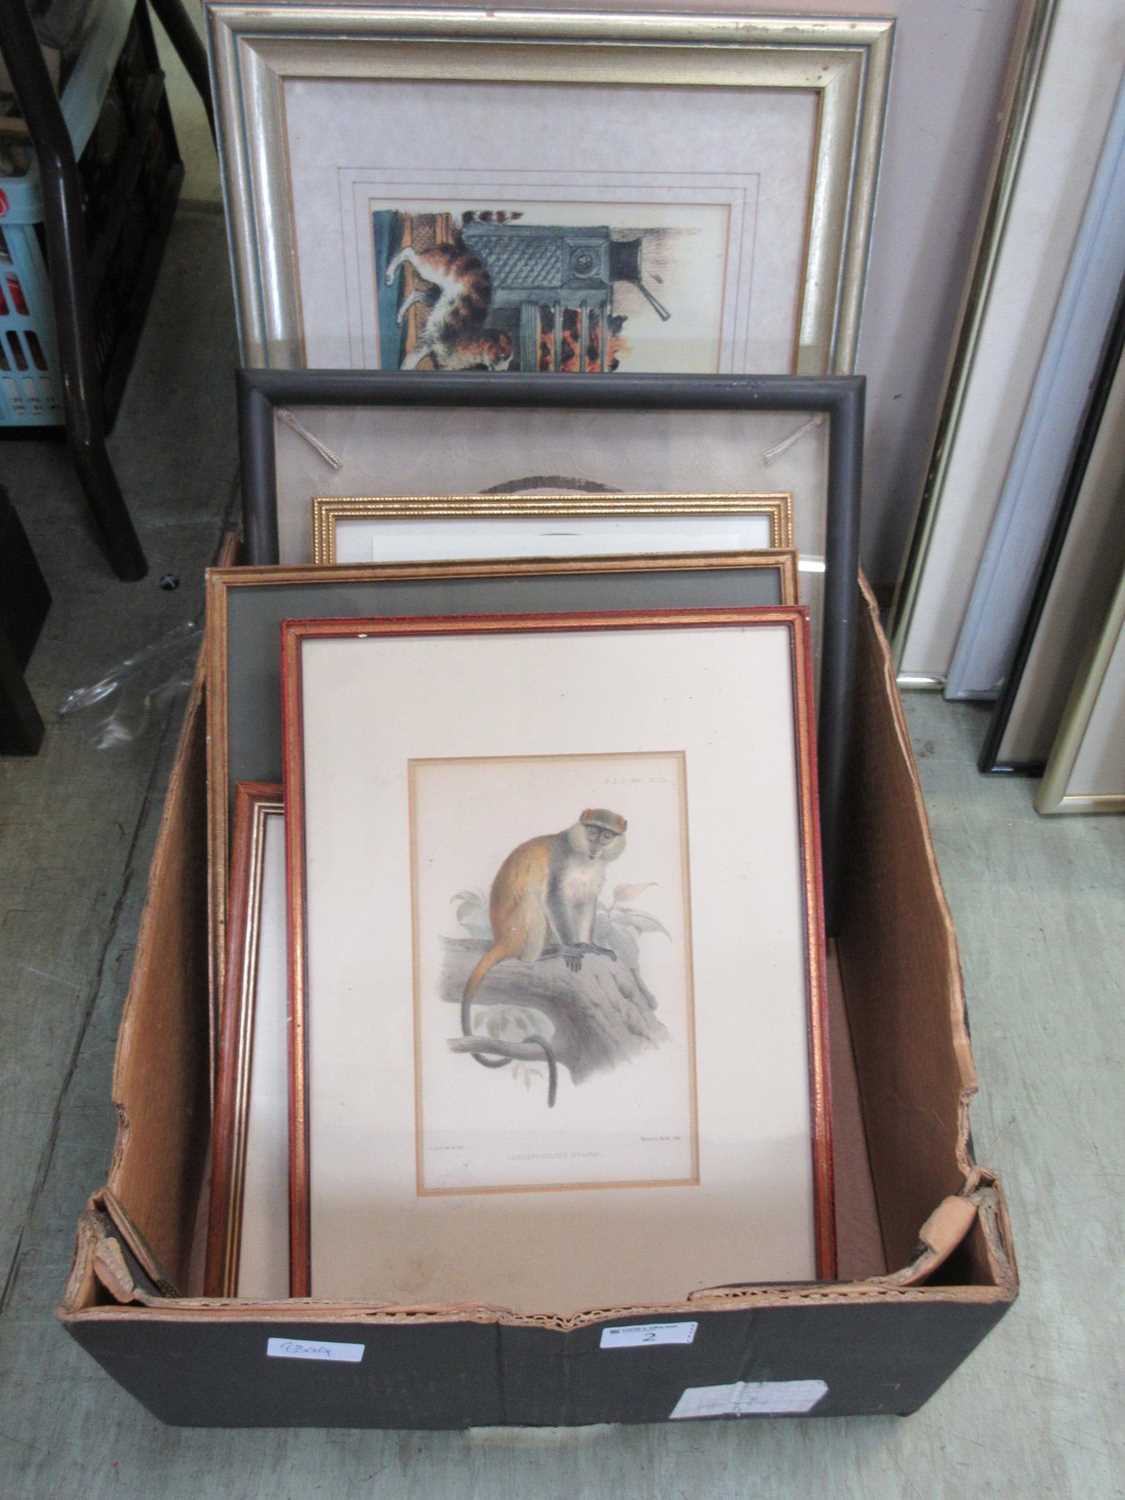 A tray containing artwork depicting monkeys to include prints, needleworks, etc